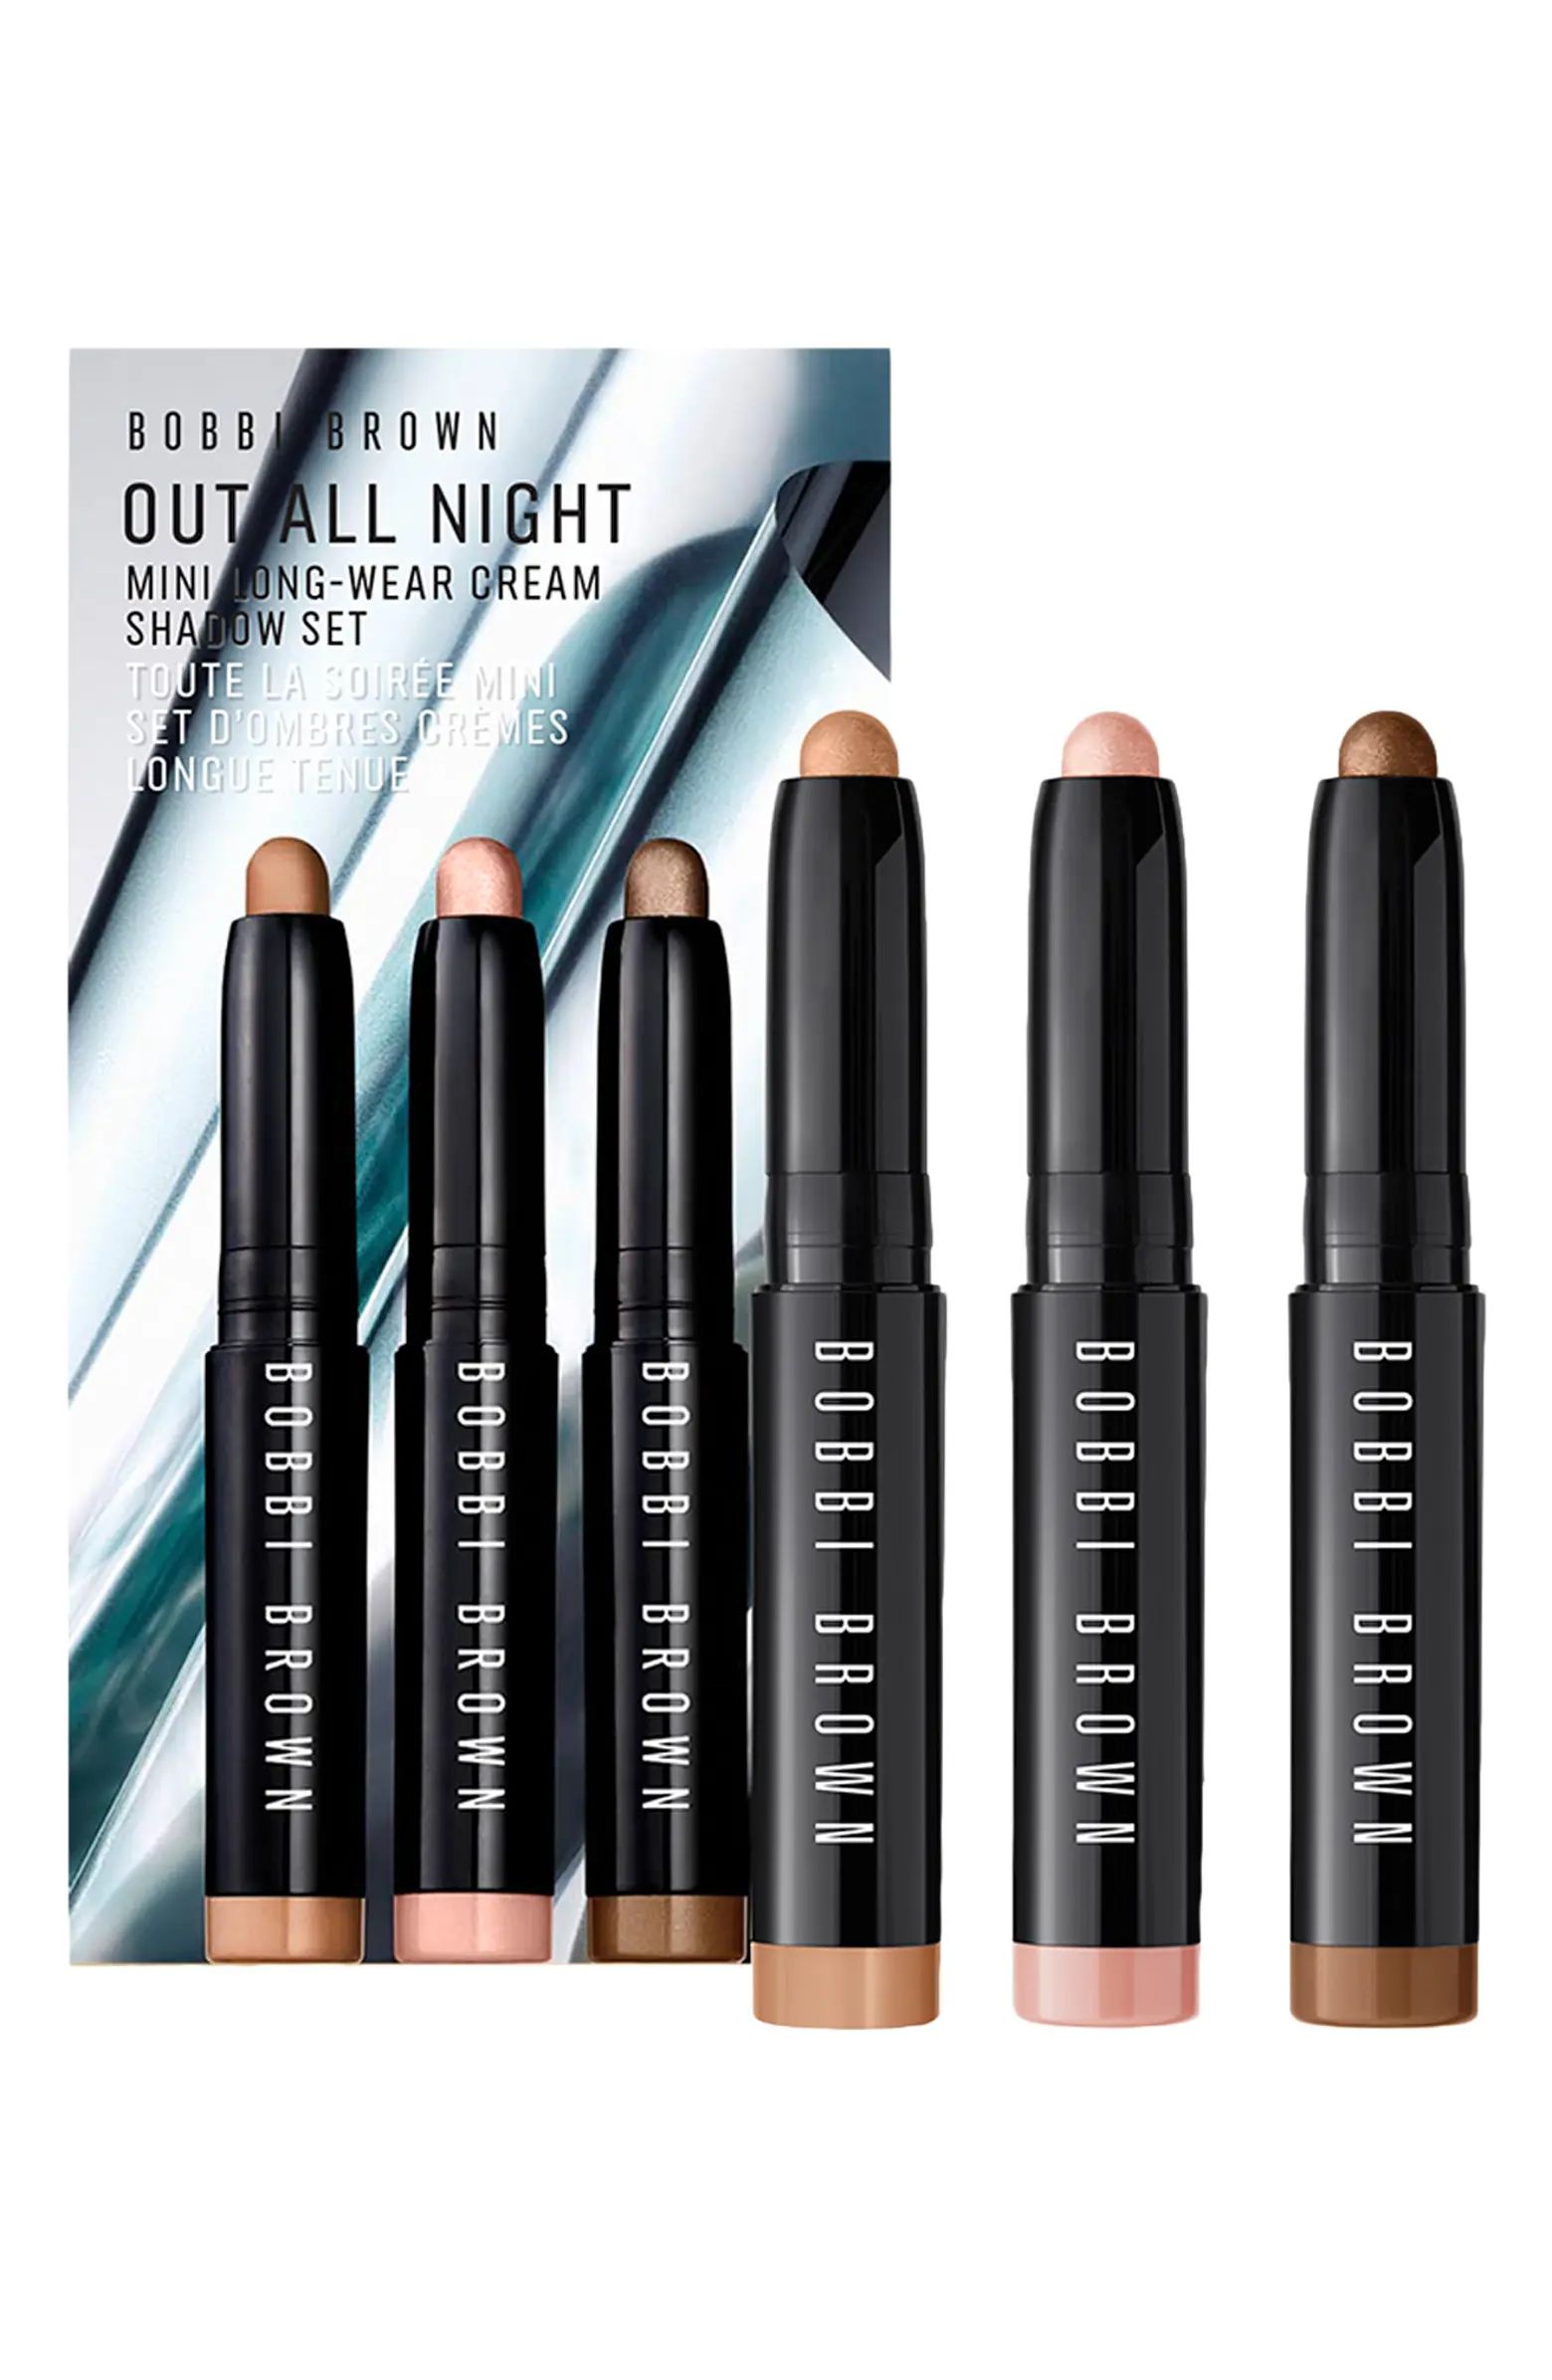 Bobbi Brown Out All Night Mini Long-Wear Cream Shadow Set USD $50 Value | Nordstrom | Nordstrom